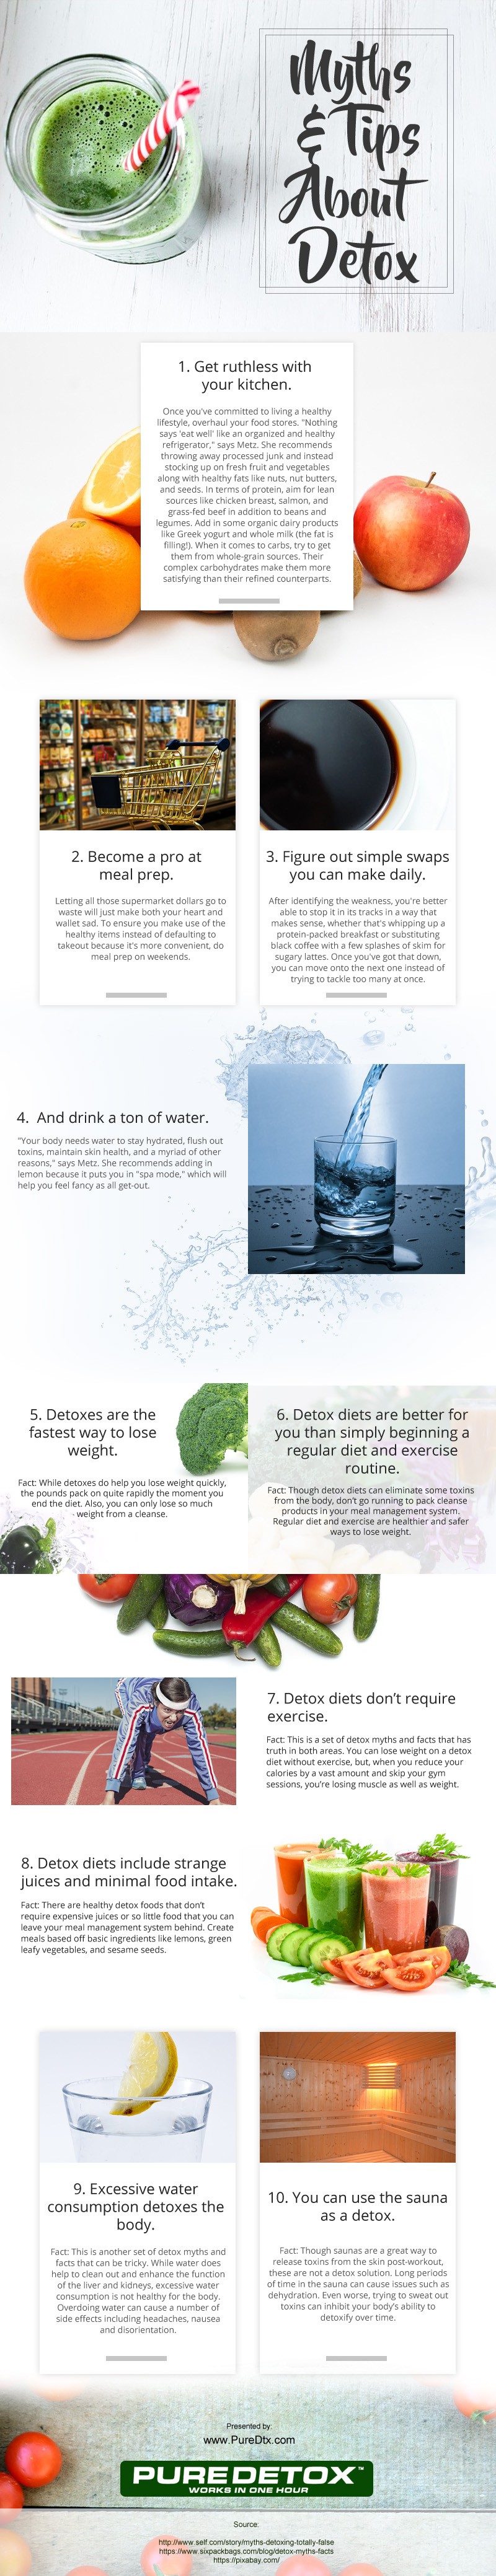 Myths & Tips About Detox [infographic]